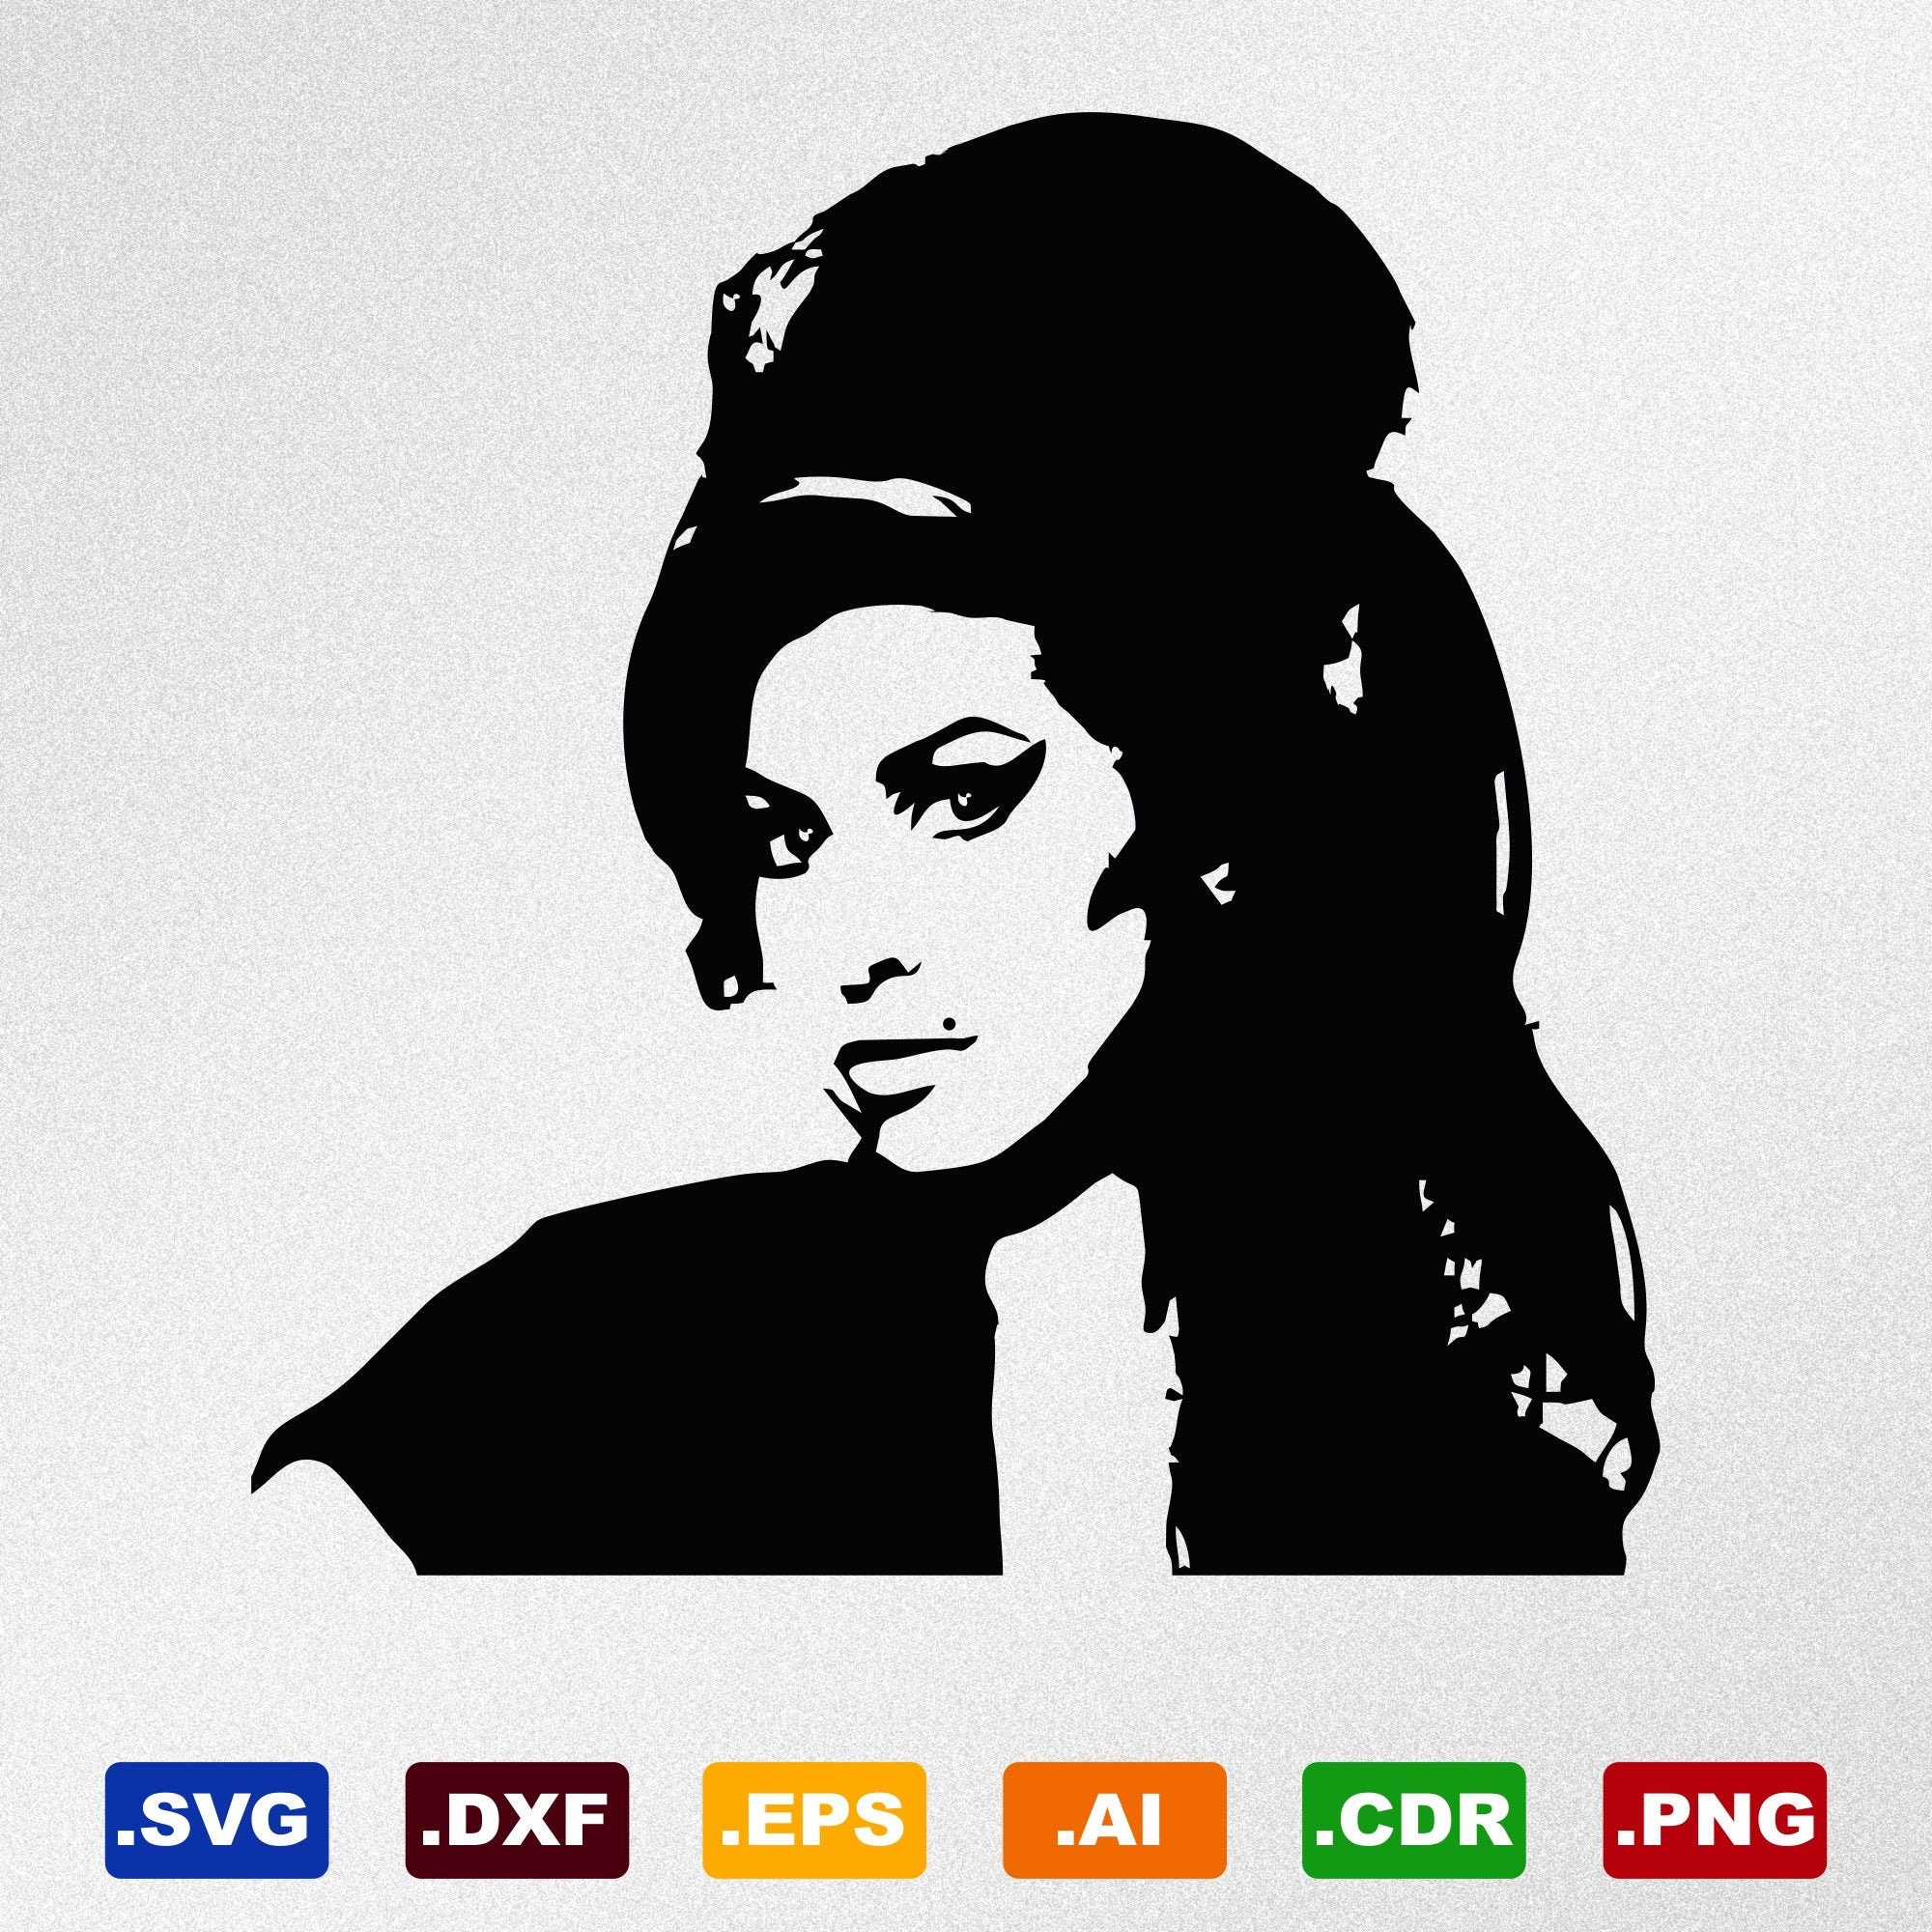 Amy Winehouse Portrait Svg Dxf Eps Ai Cdr Vector Files for | Etsy